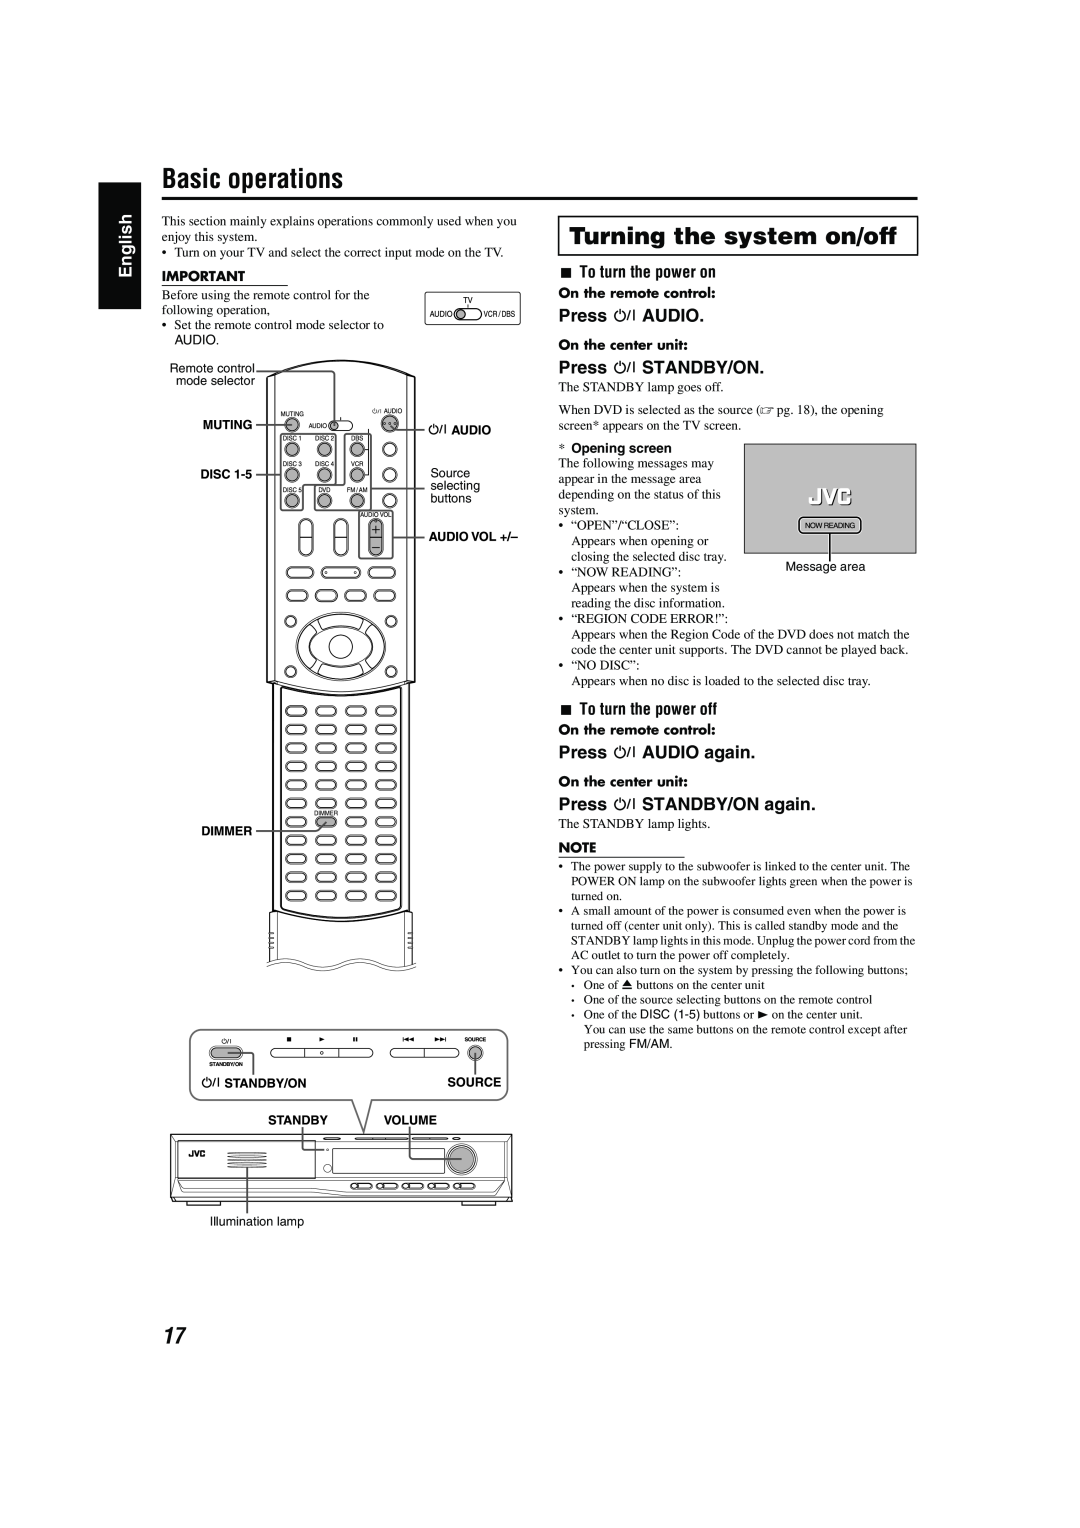 JVC TH-M42 manual Basic operations, Turning the system on/off, English, Press F STANDBY/ON, Press F AUDIO again 